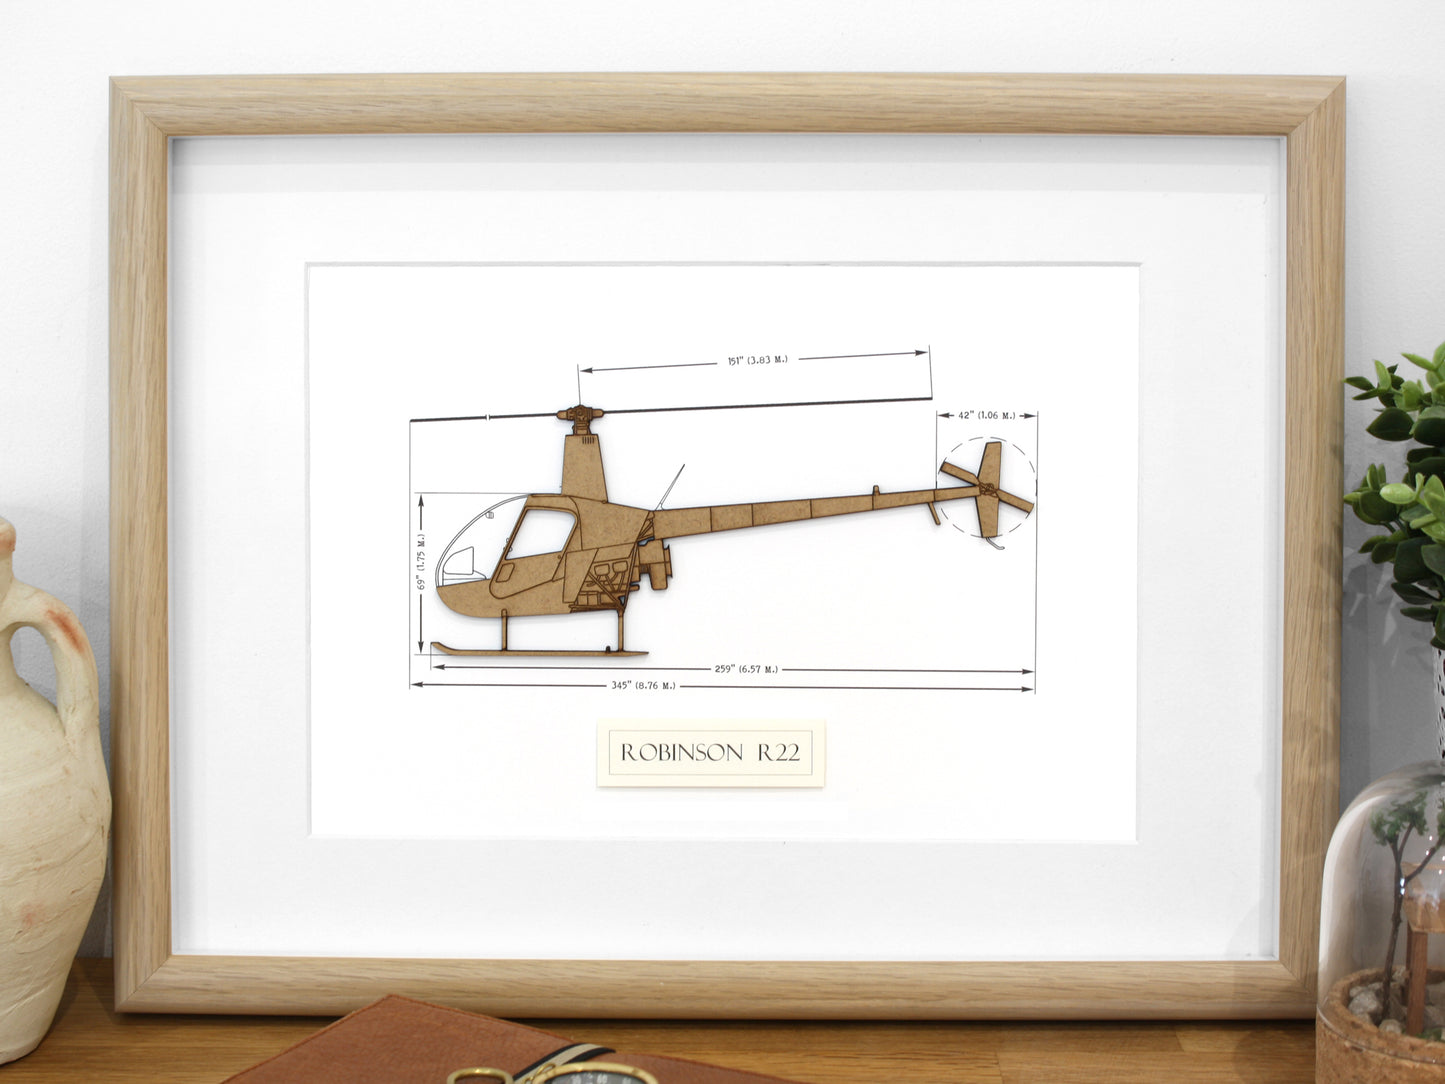 Robinson R22 helicopter art